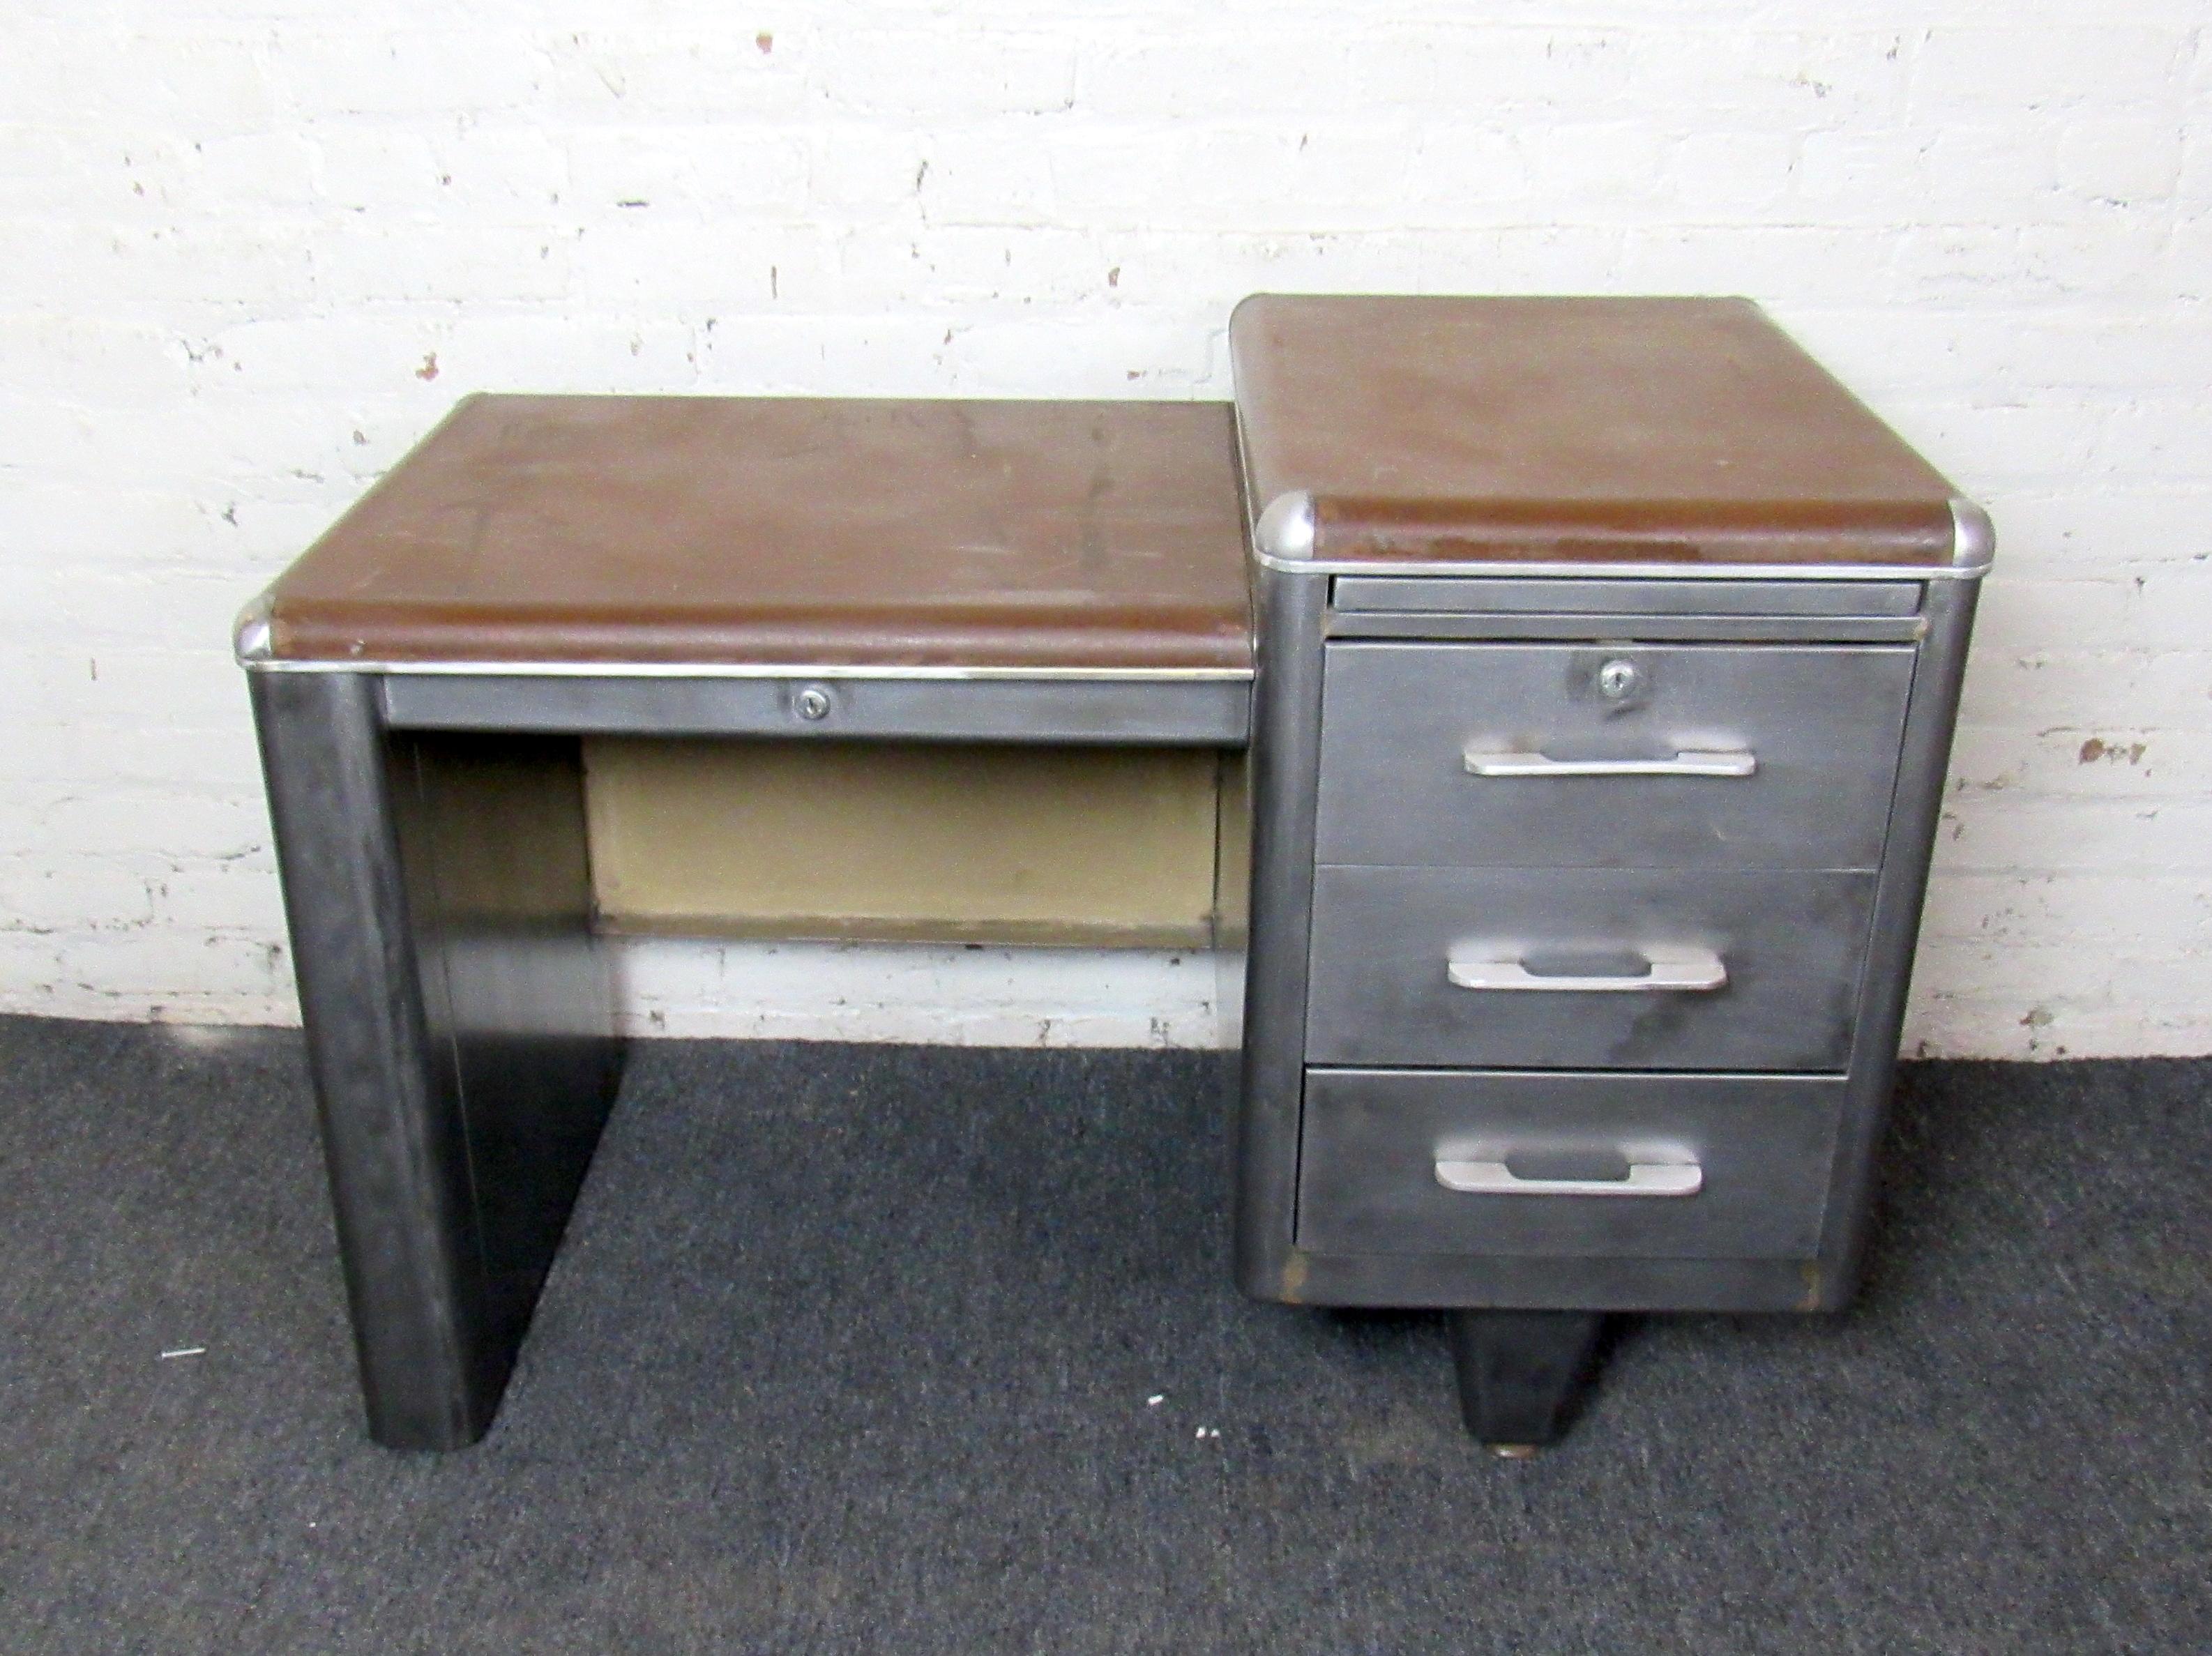 A vintage industrial-style metal desk that is sure to add rugged character to any office, garage, or shop. Three large drawers on the right side of the desk allow for plenty of storage while the top of the desk makes for a smooth writing surface.